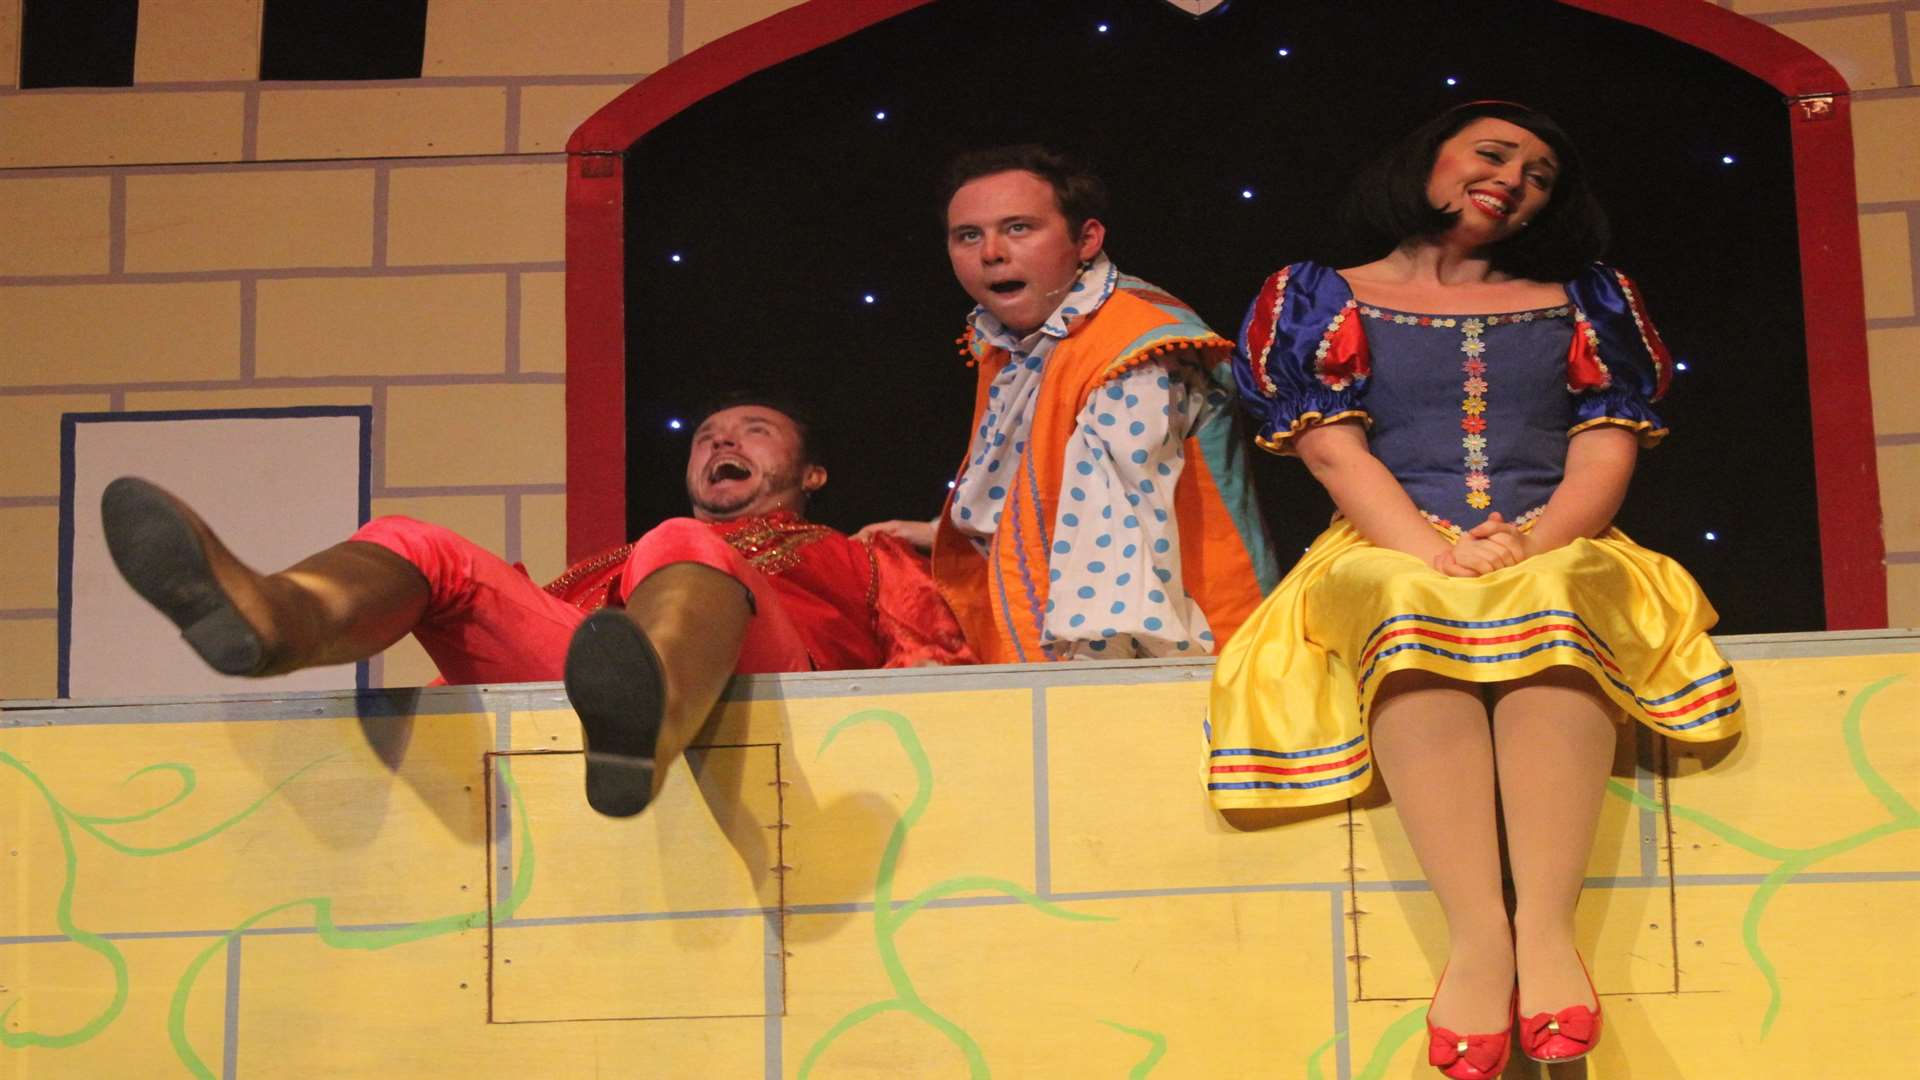 Comedy as Robert Brendan as Prince Lorenzo tries to serenade Kate Greenwood as Snow White when they are interrupted by Joshua Pascoe as Muddles